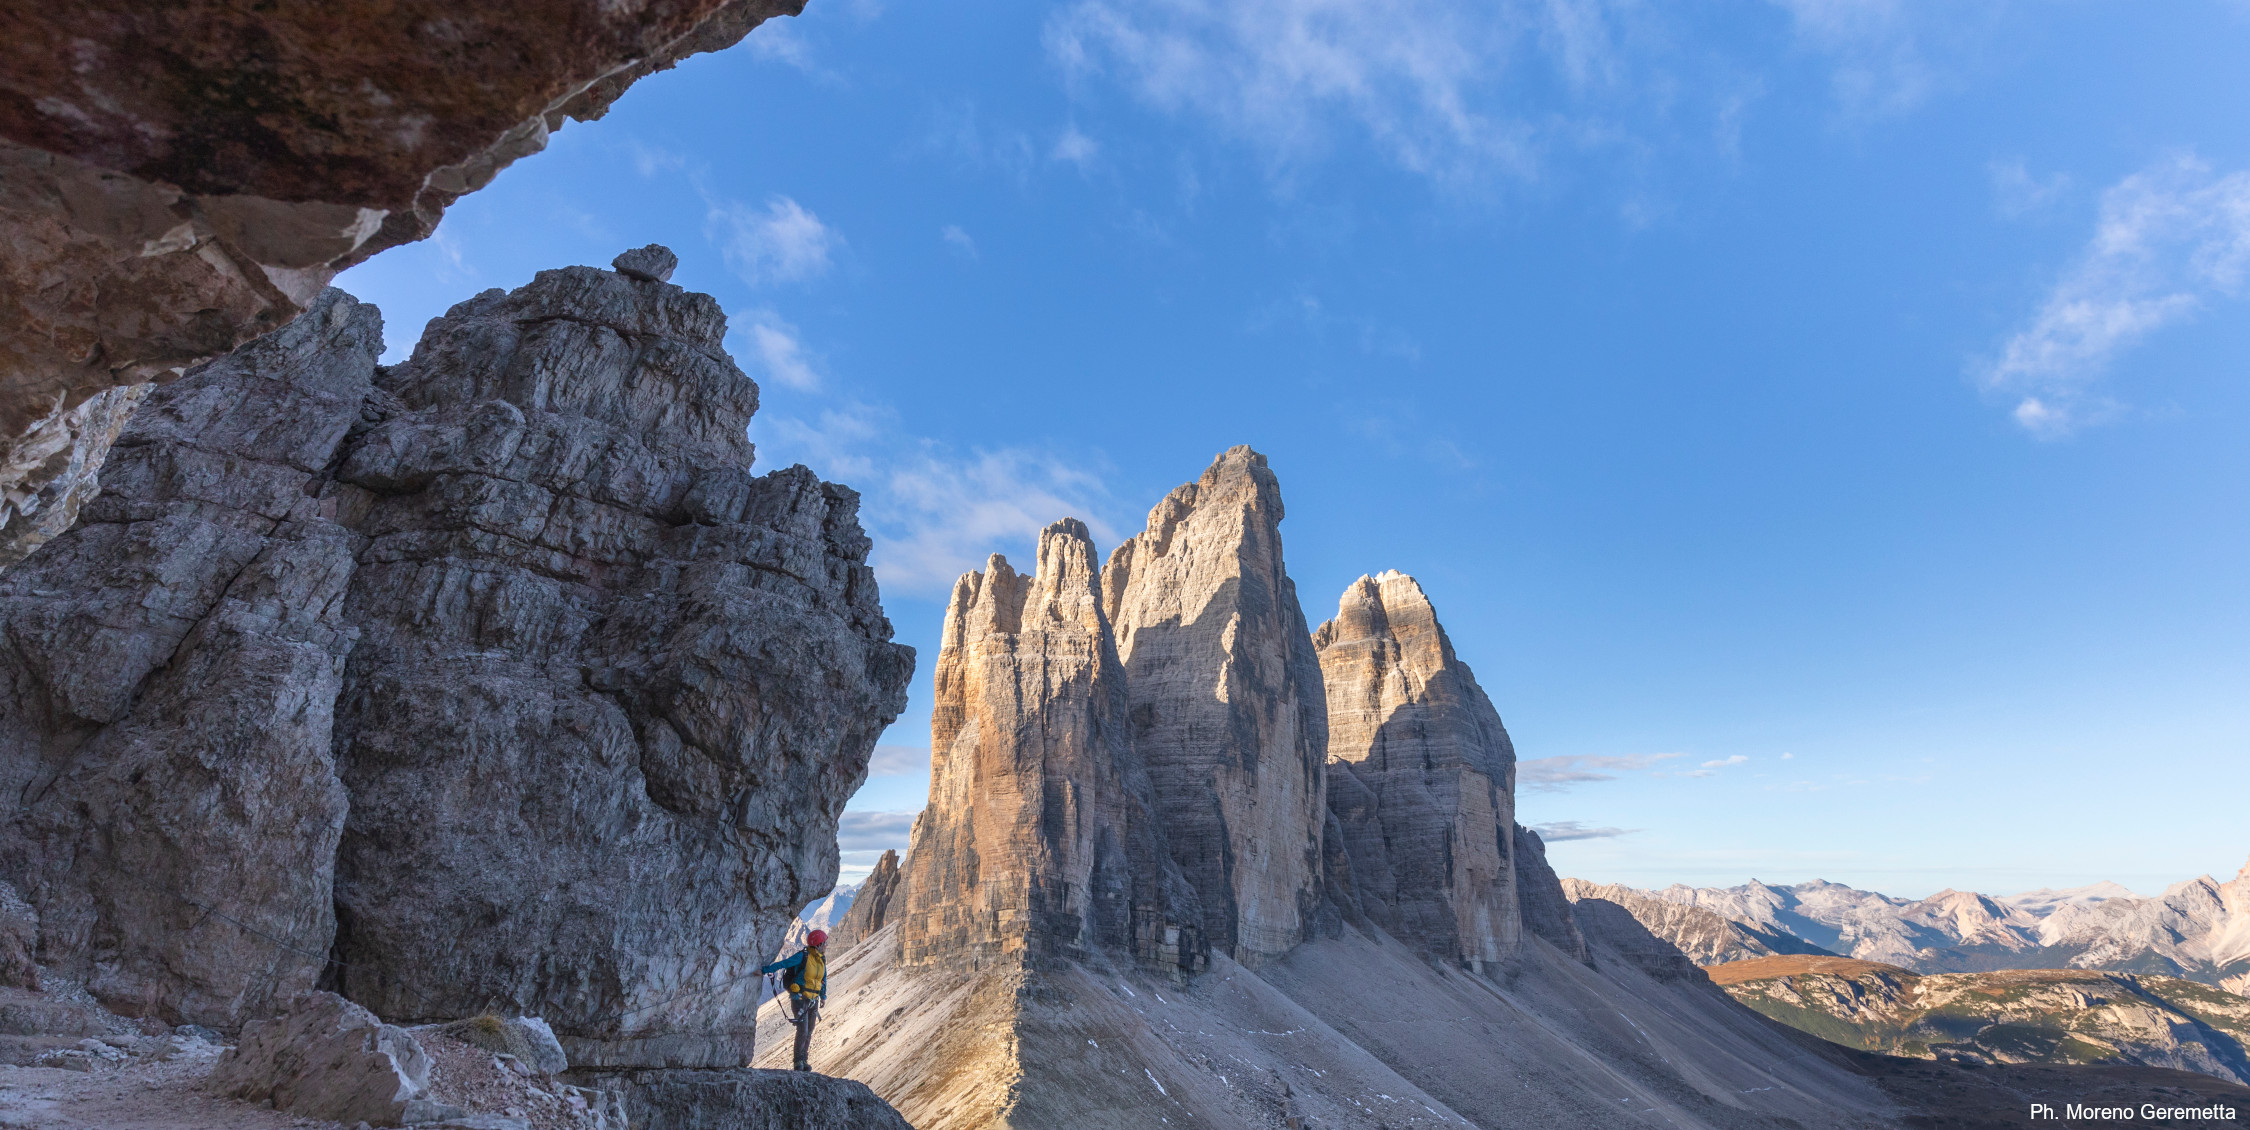 Tourism in the Dolomites: in the picture, the Tre Cime di Lavaredo as seen from Monte Paterno